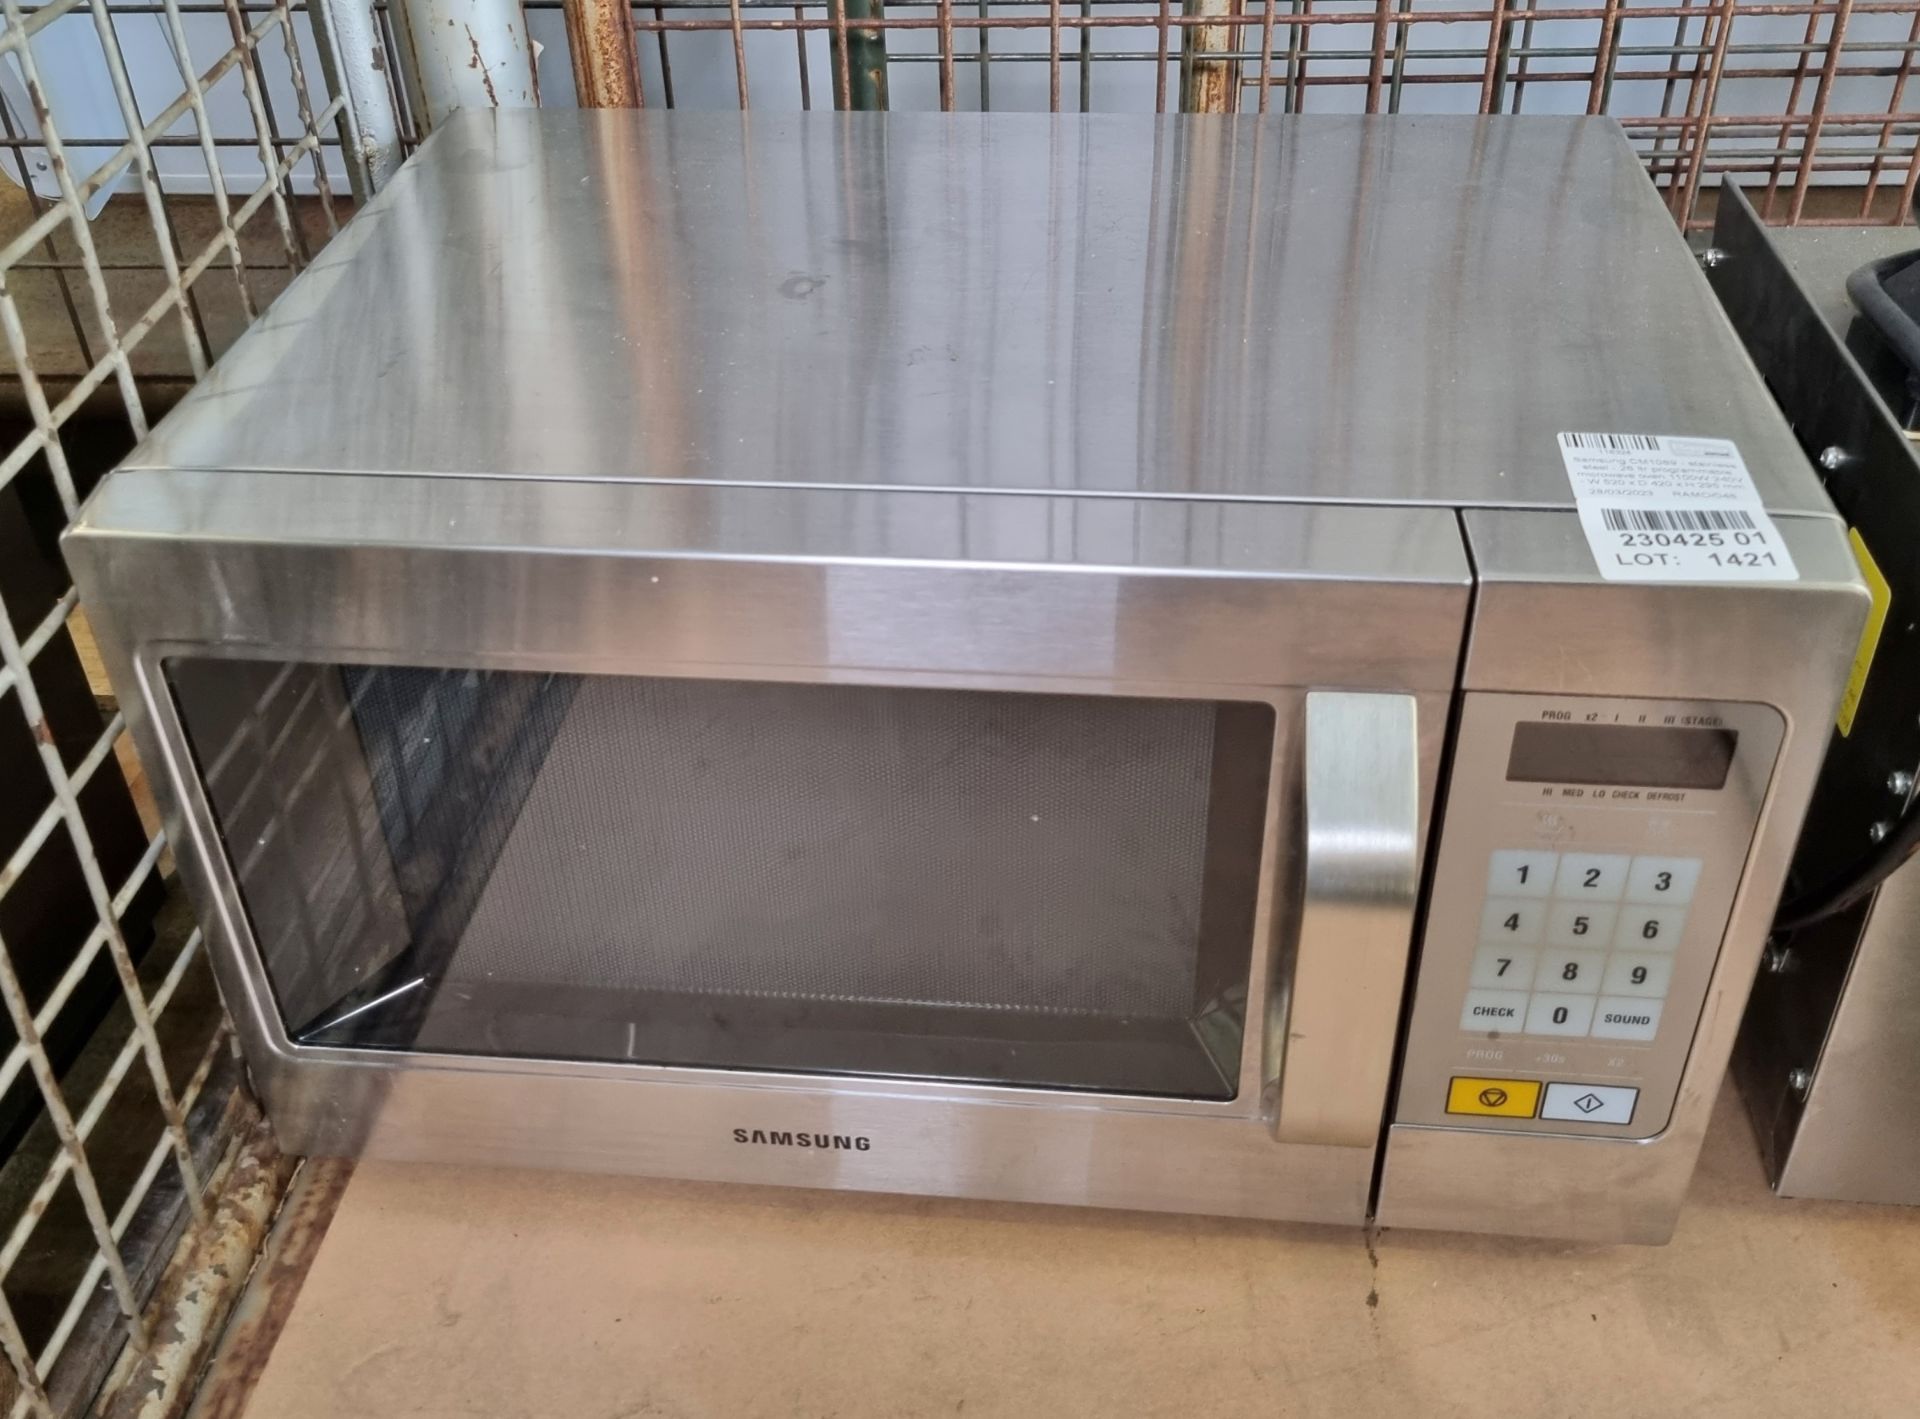 Samsung CM1089 - stainless steel - 26 ltr programmable microwave oven 1100W 240V - W 520 x D 420 - Image 2 of 4